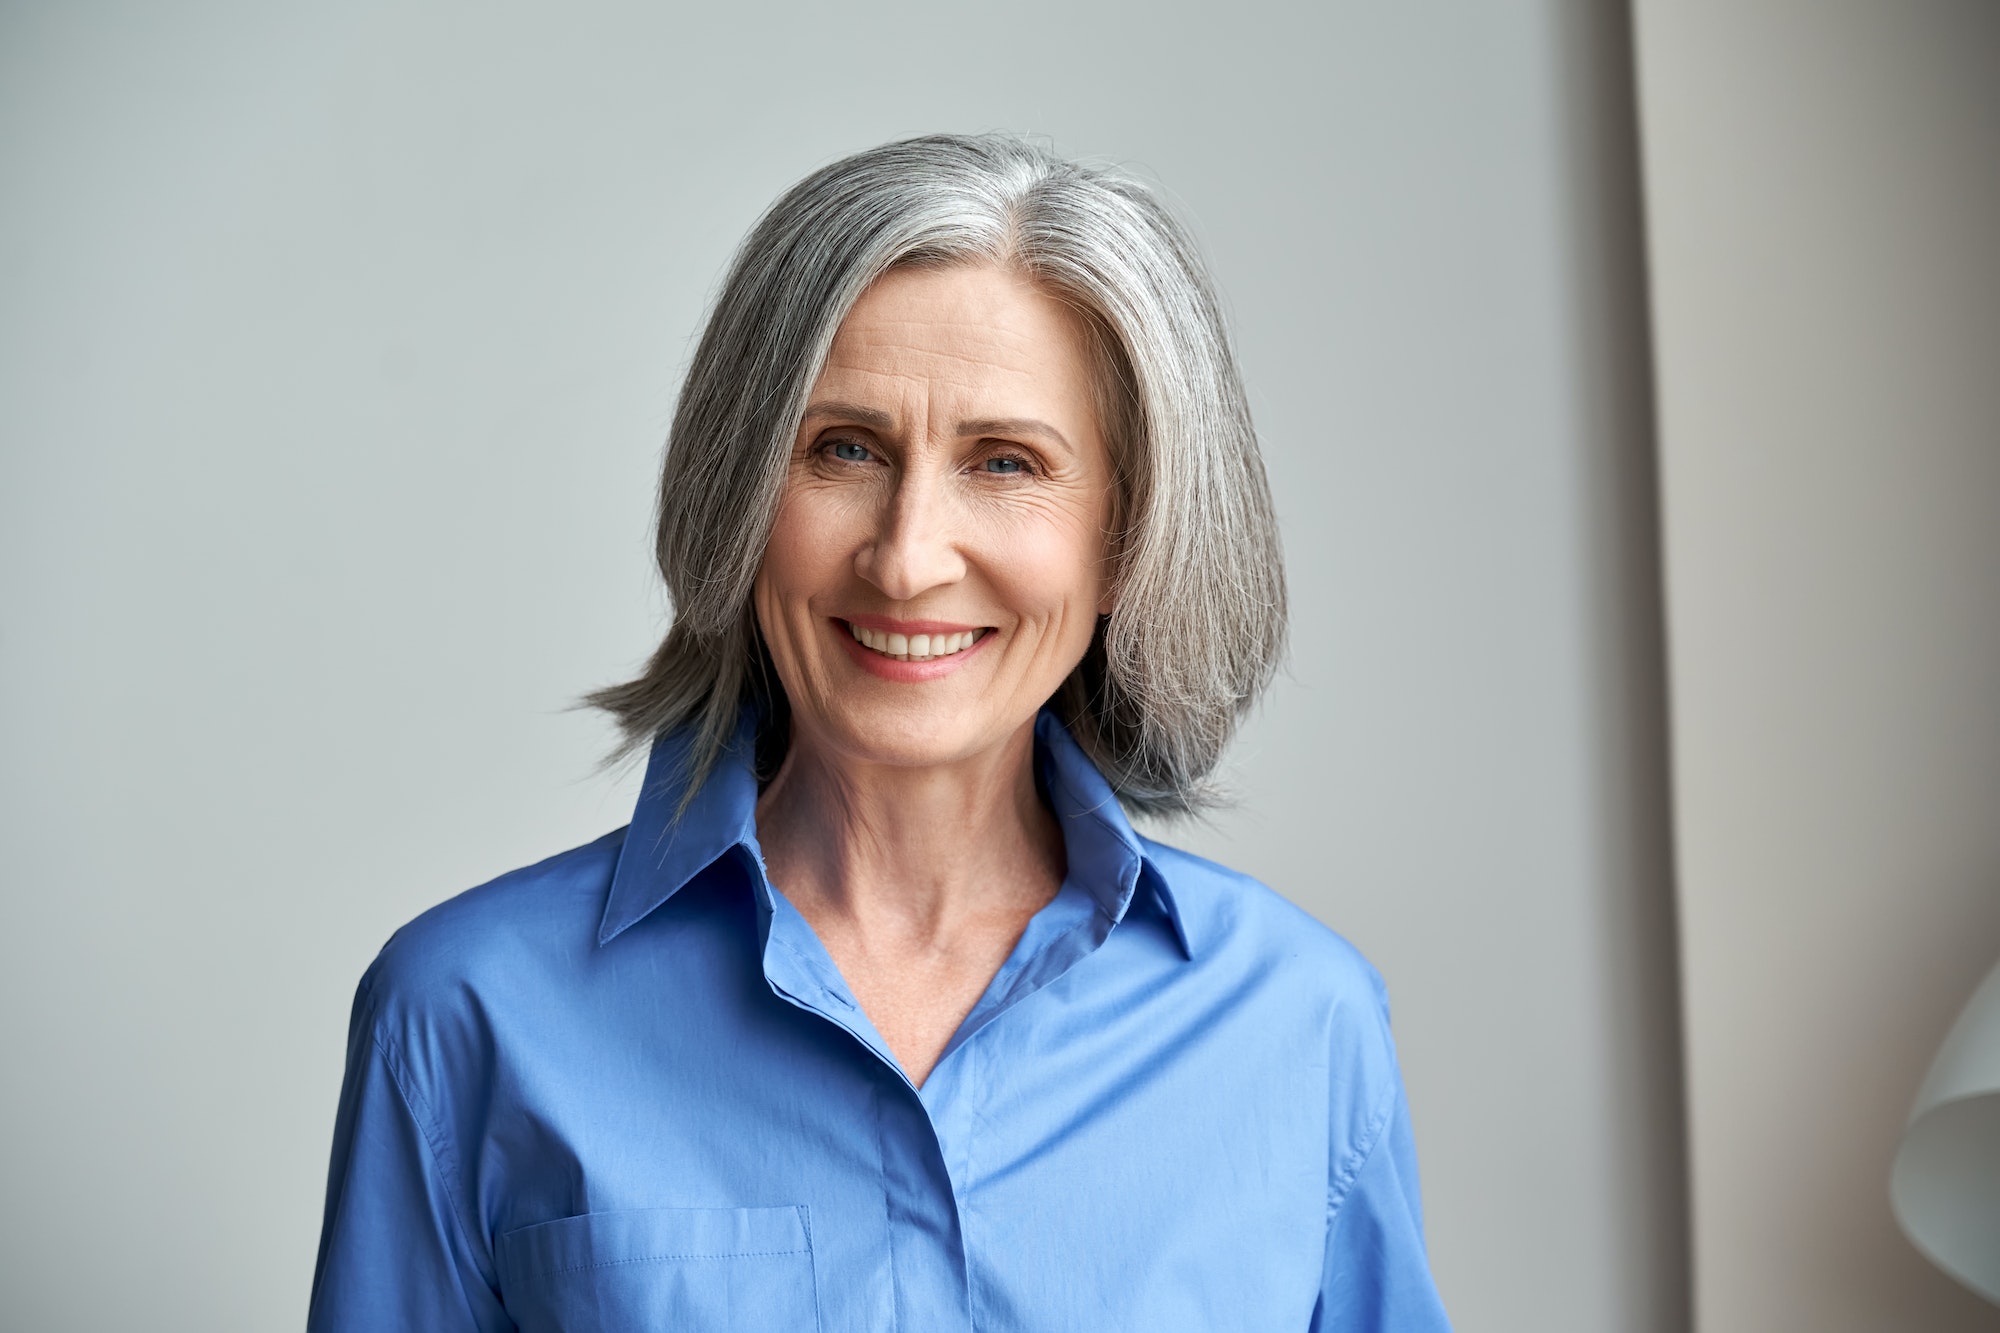 Smiling sophisticated mature grey-haired woman headshot portrait.